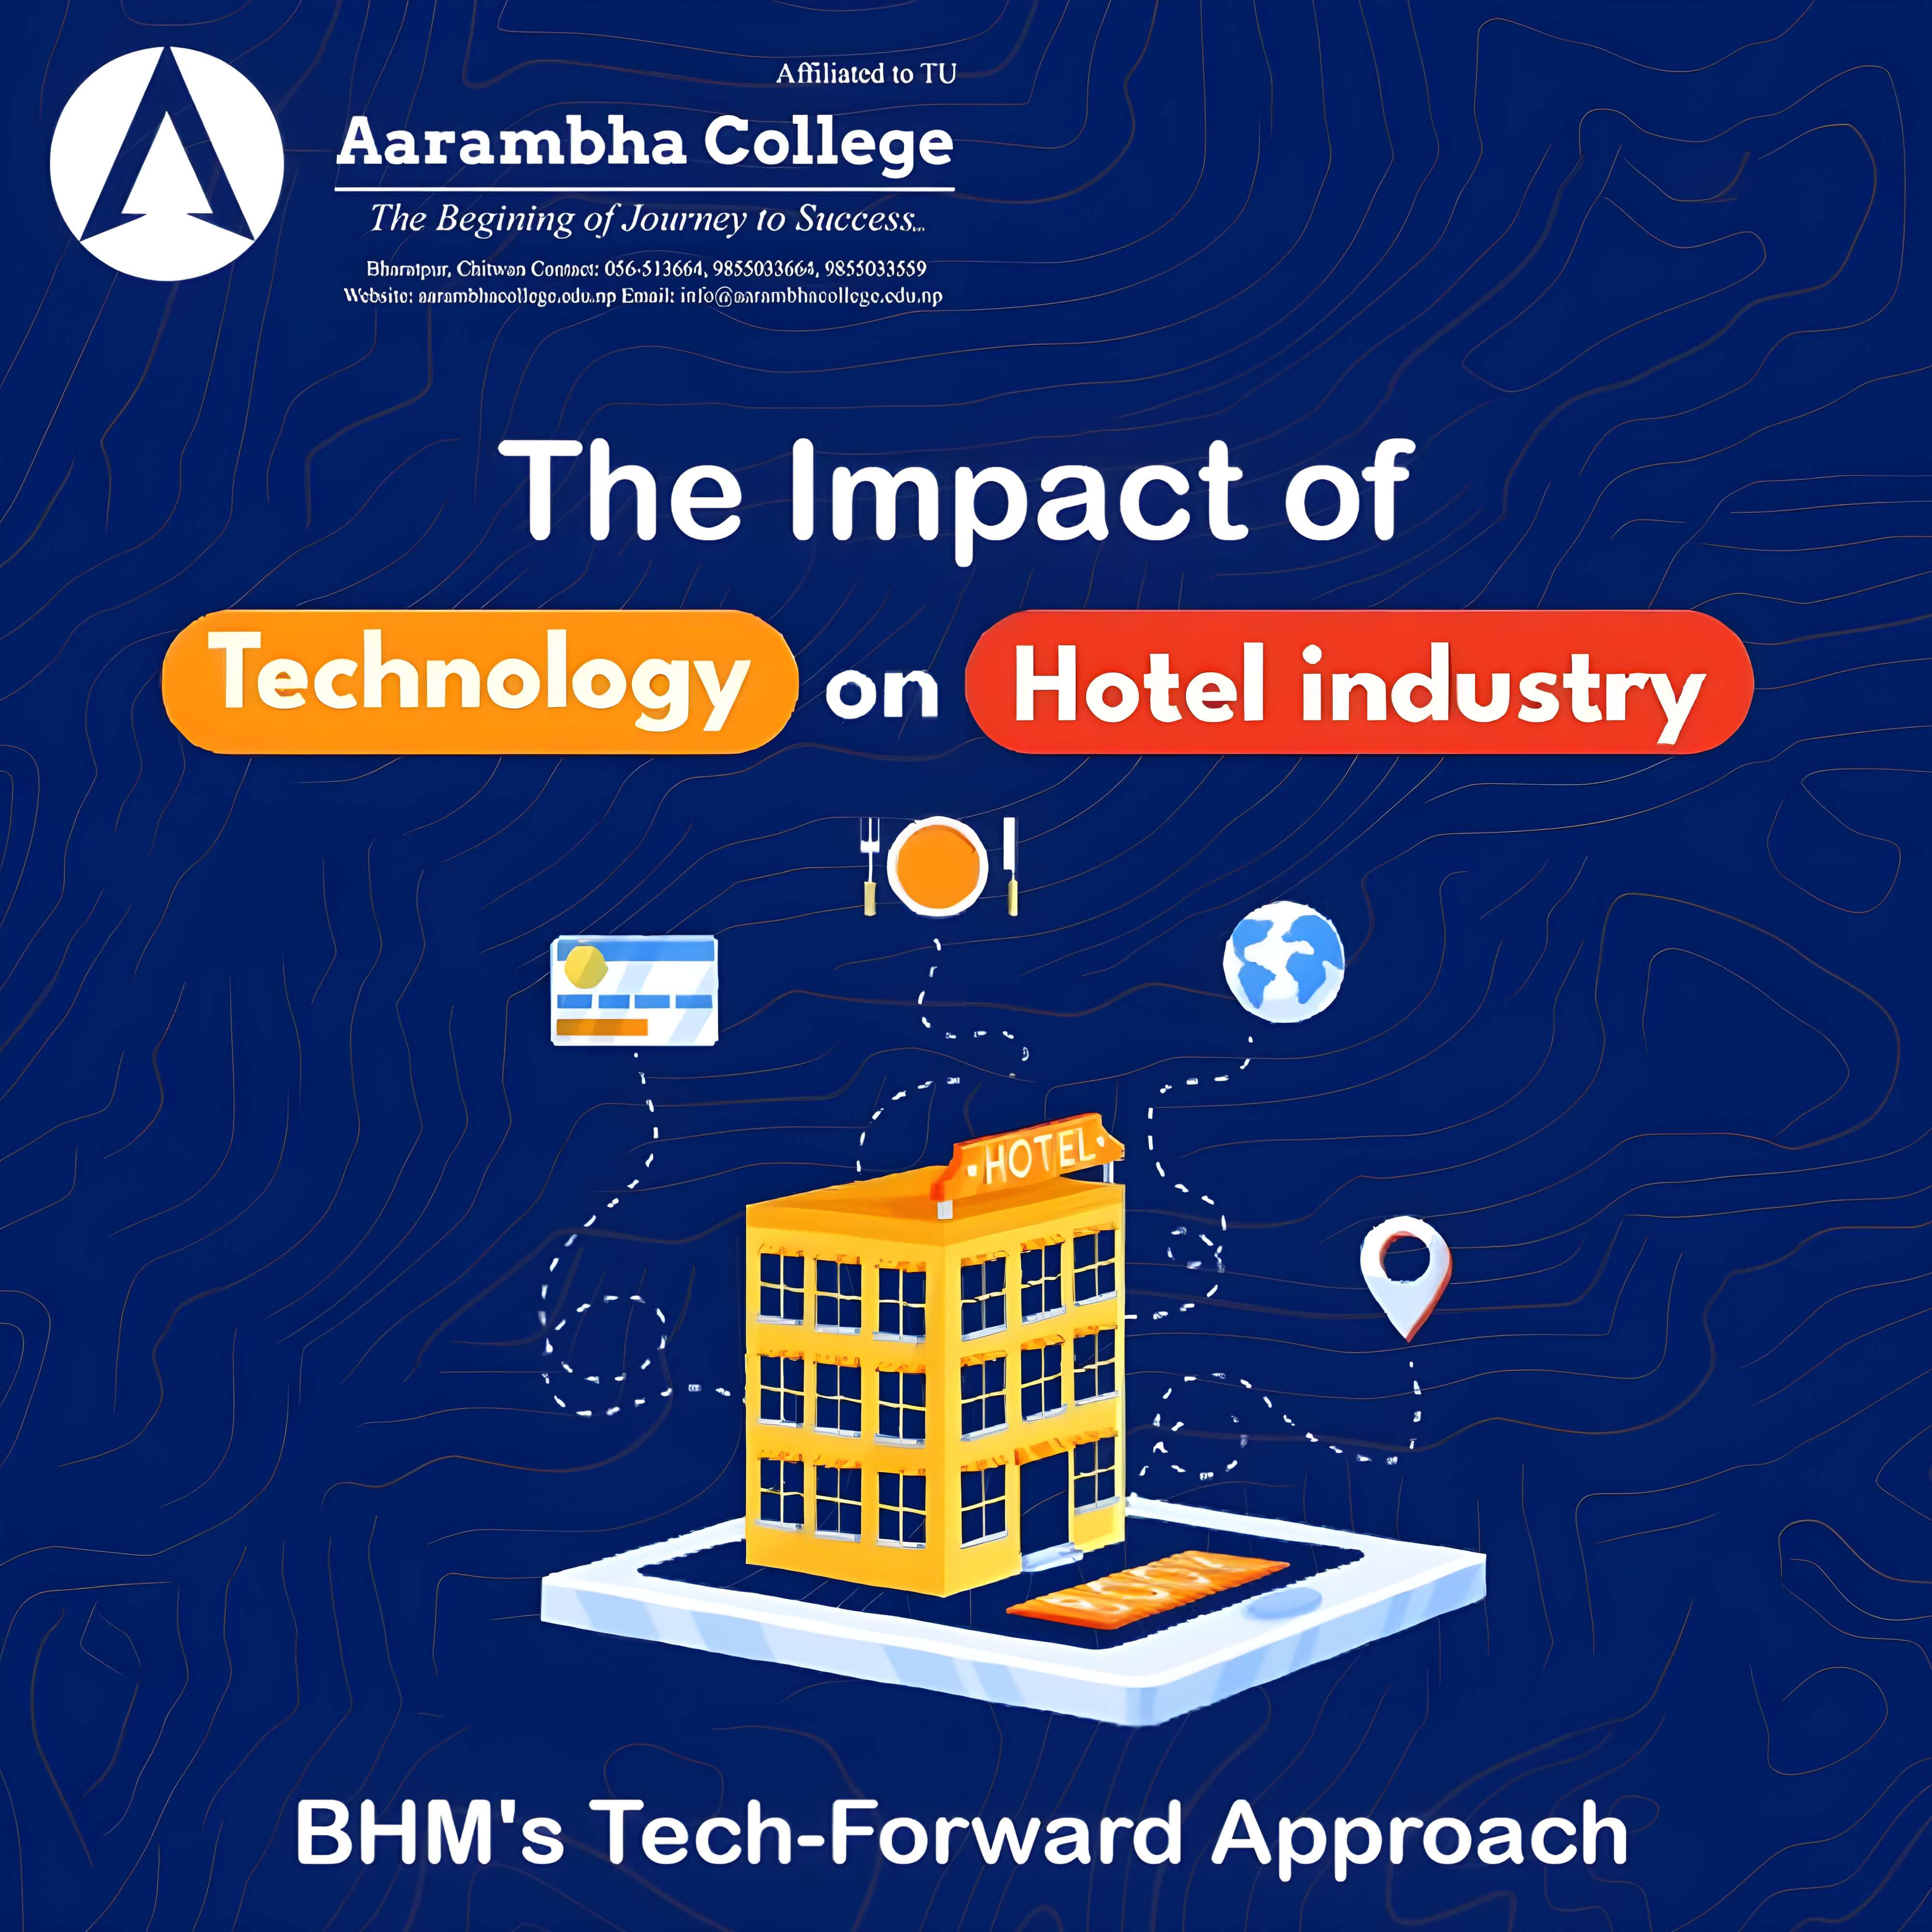 The Impact of Technology on Hospitality: BHM's Tech-Forward Approach